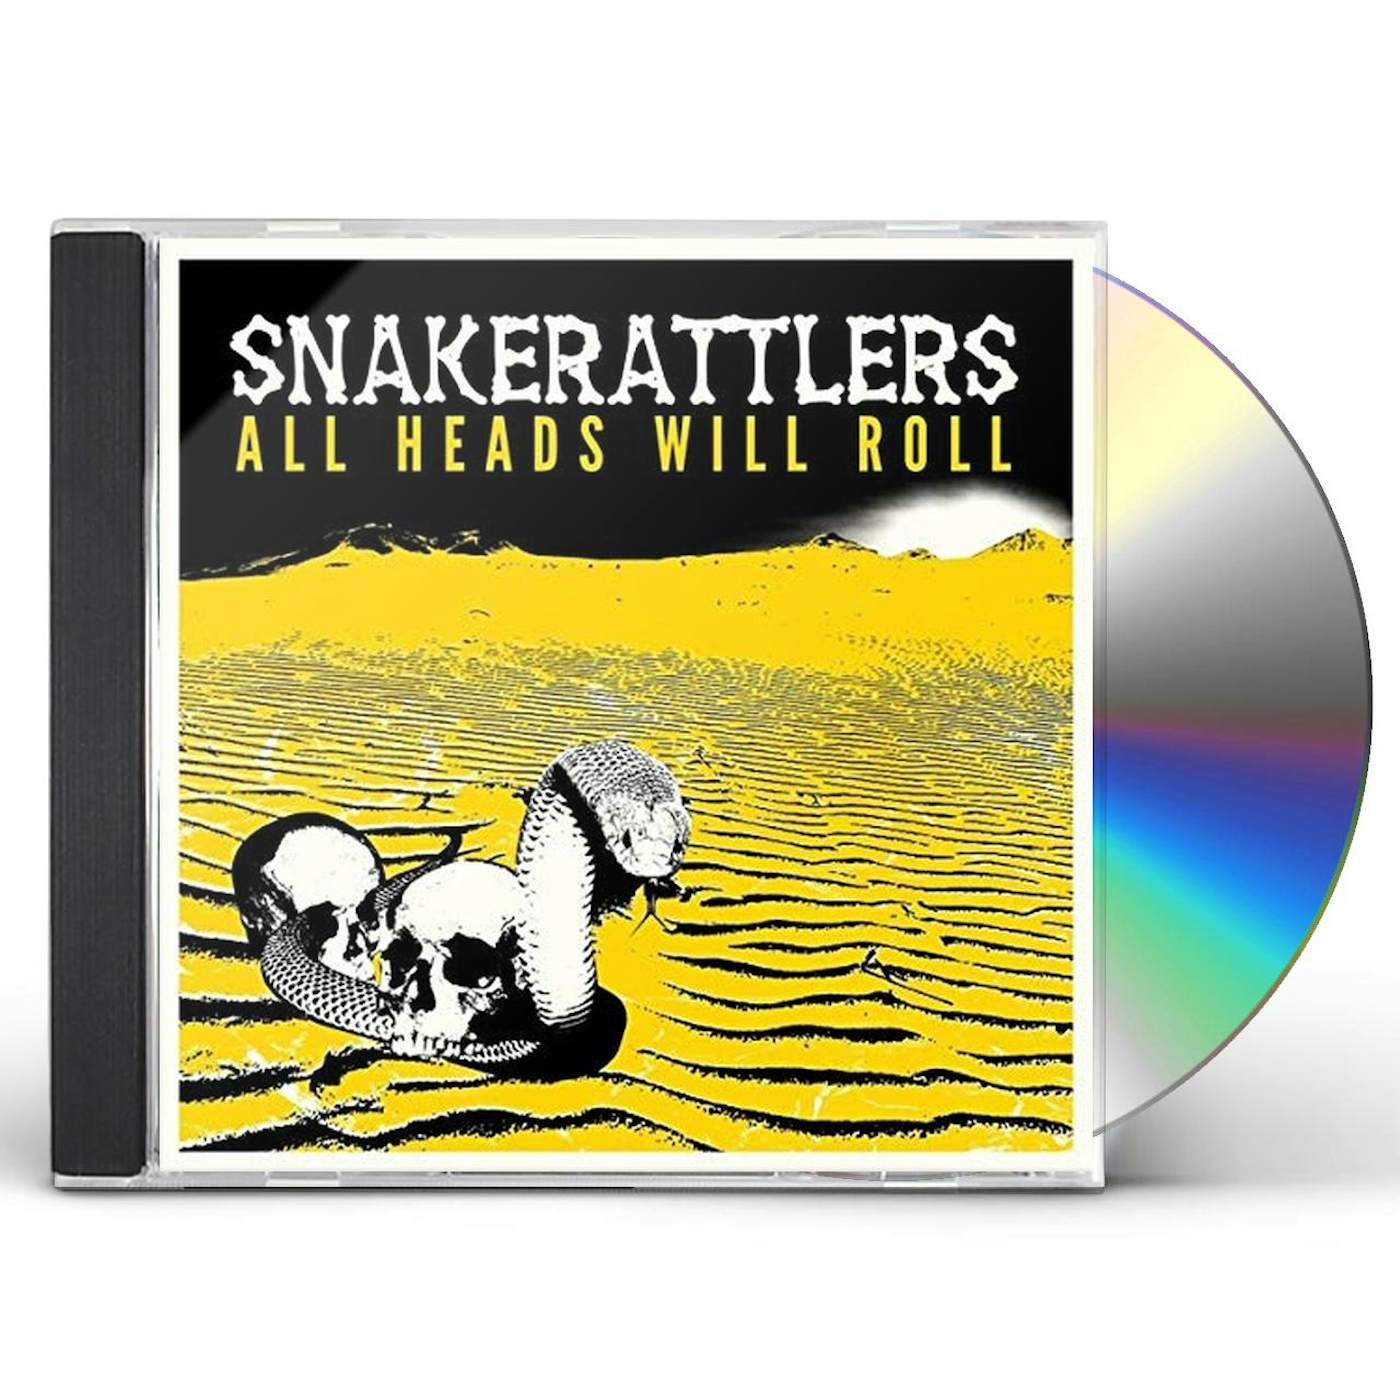 Snakerattlers ALL HEADS WILL ROLL CD